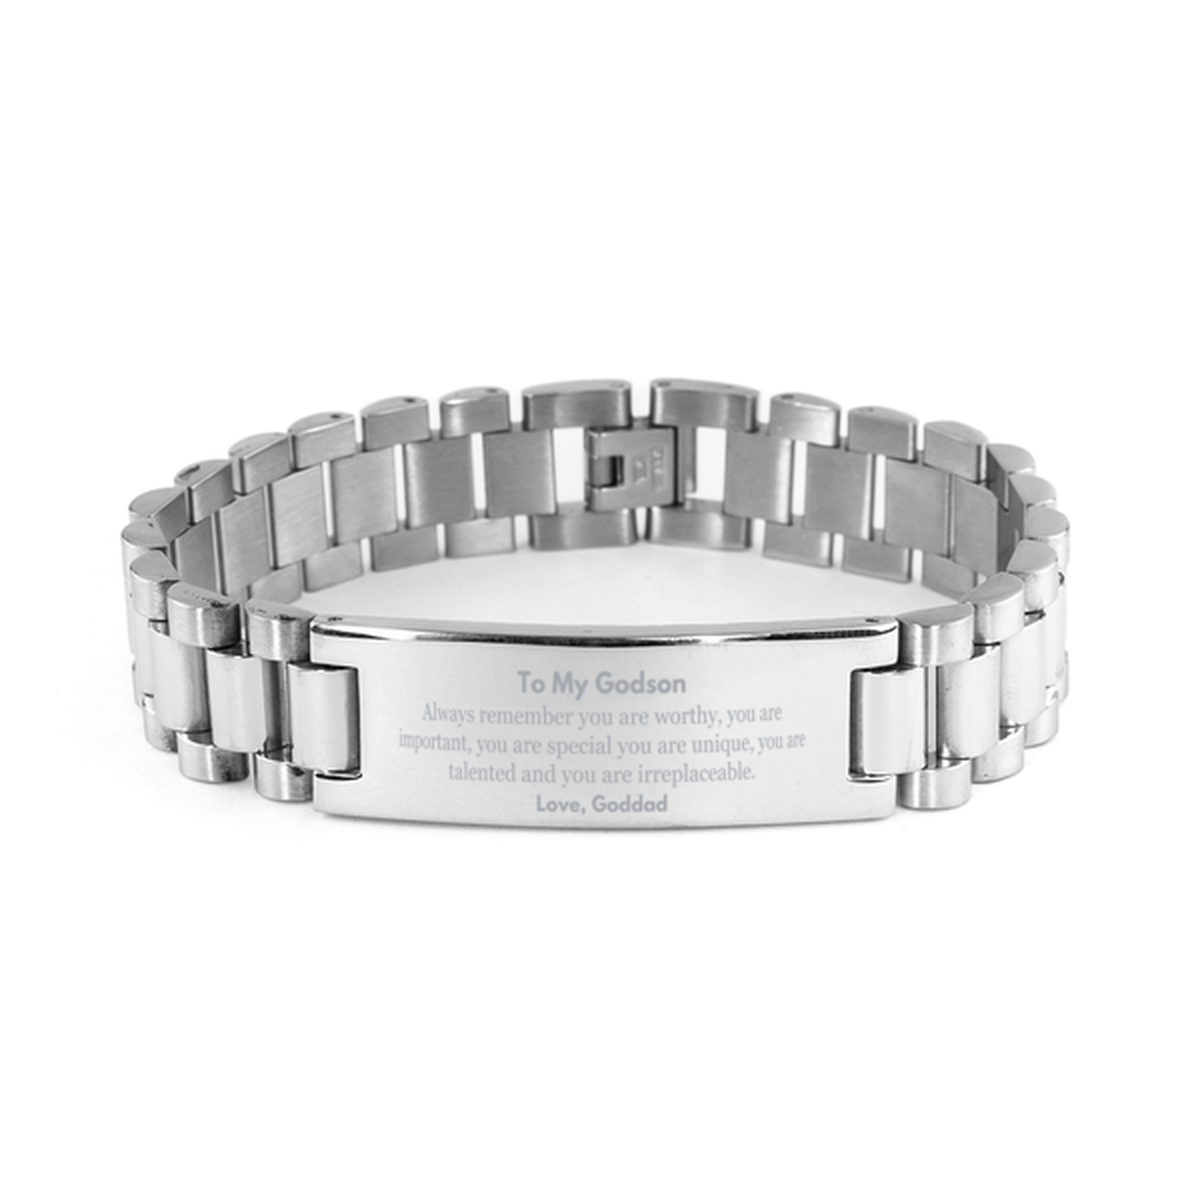 Godson Birthday Gifts from Goddad, Inspirational Ladder Stainless Steel Bracelet for Godson Christmas Graduation Gifts for Godson Always remember you are worthy, you are important. Love, Goddad